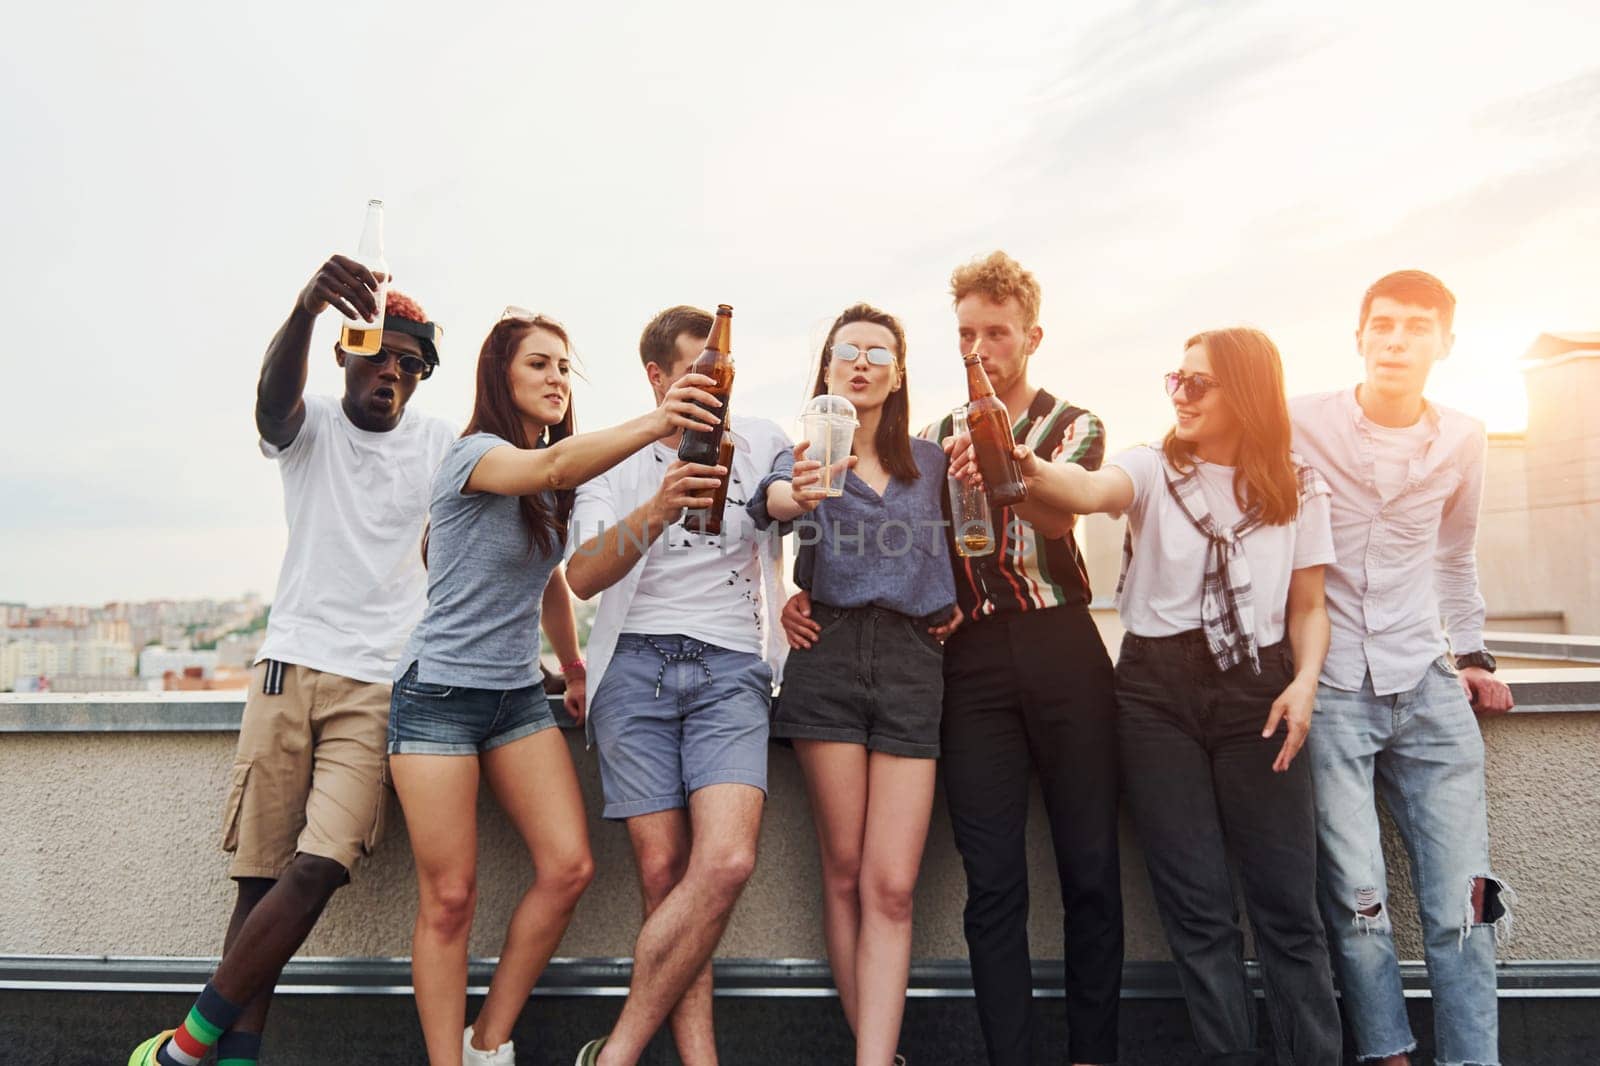 Standing with alcohol at the edge of rooftop. Group of young people in casual clothes have a party together at daytime.